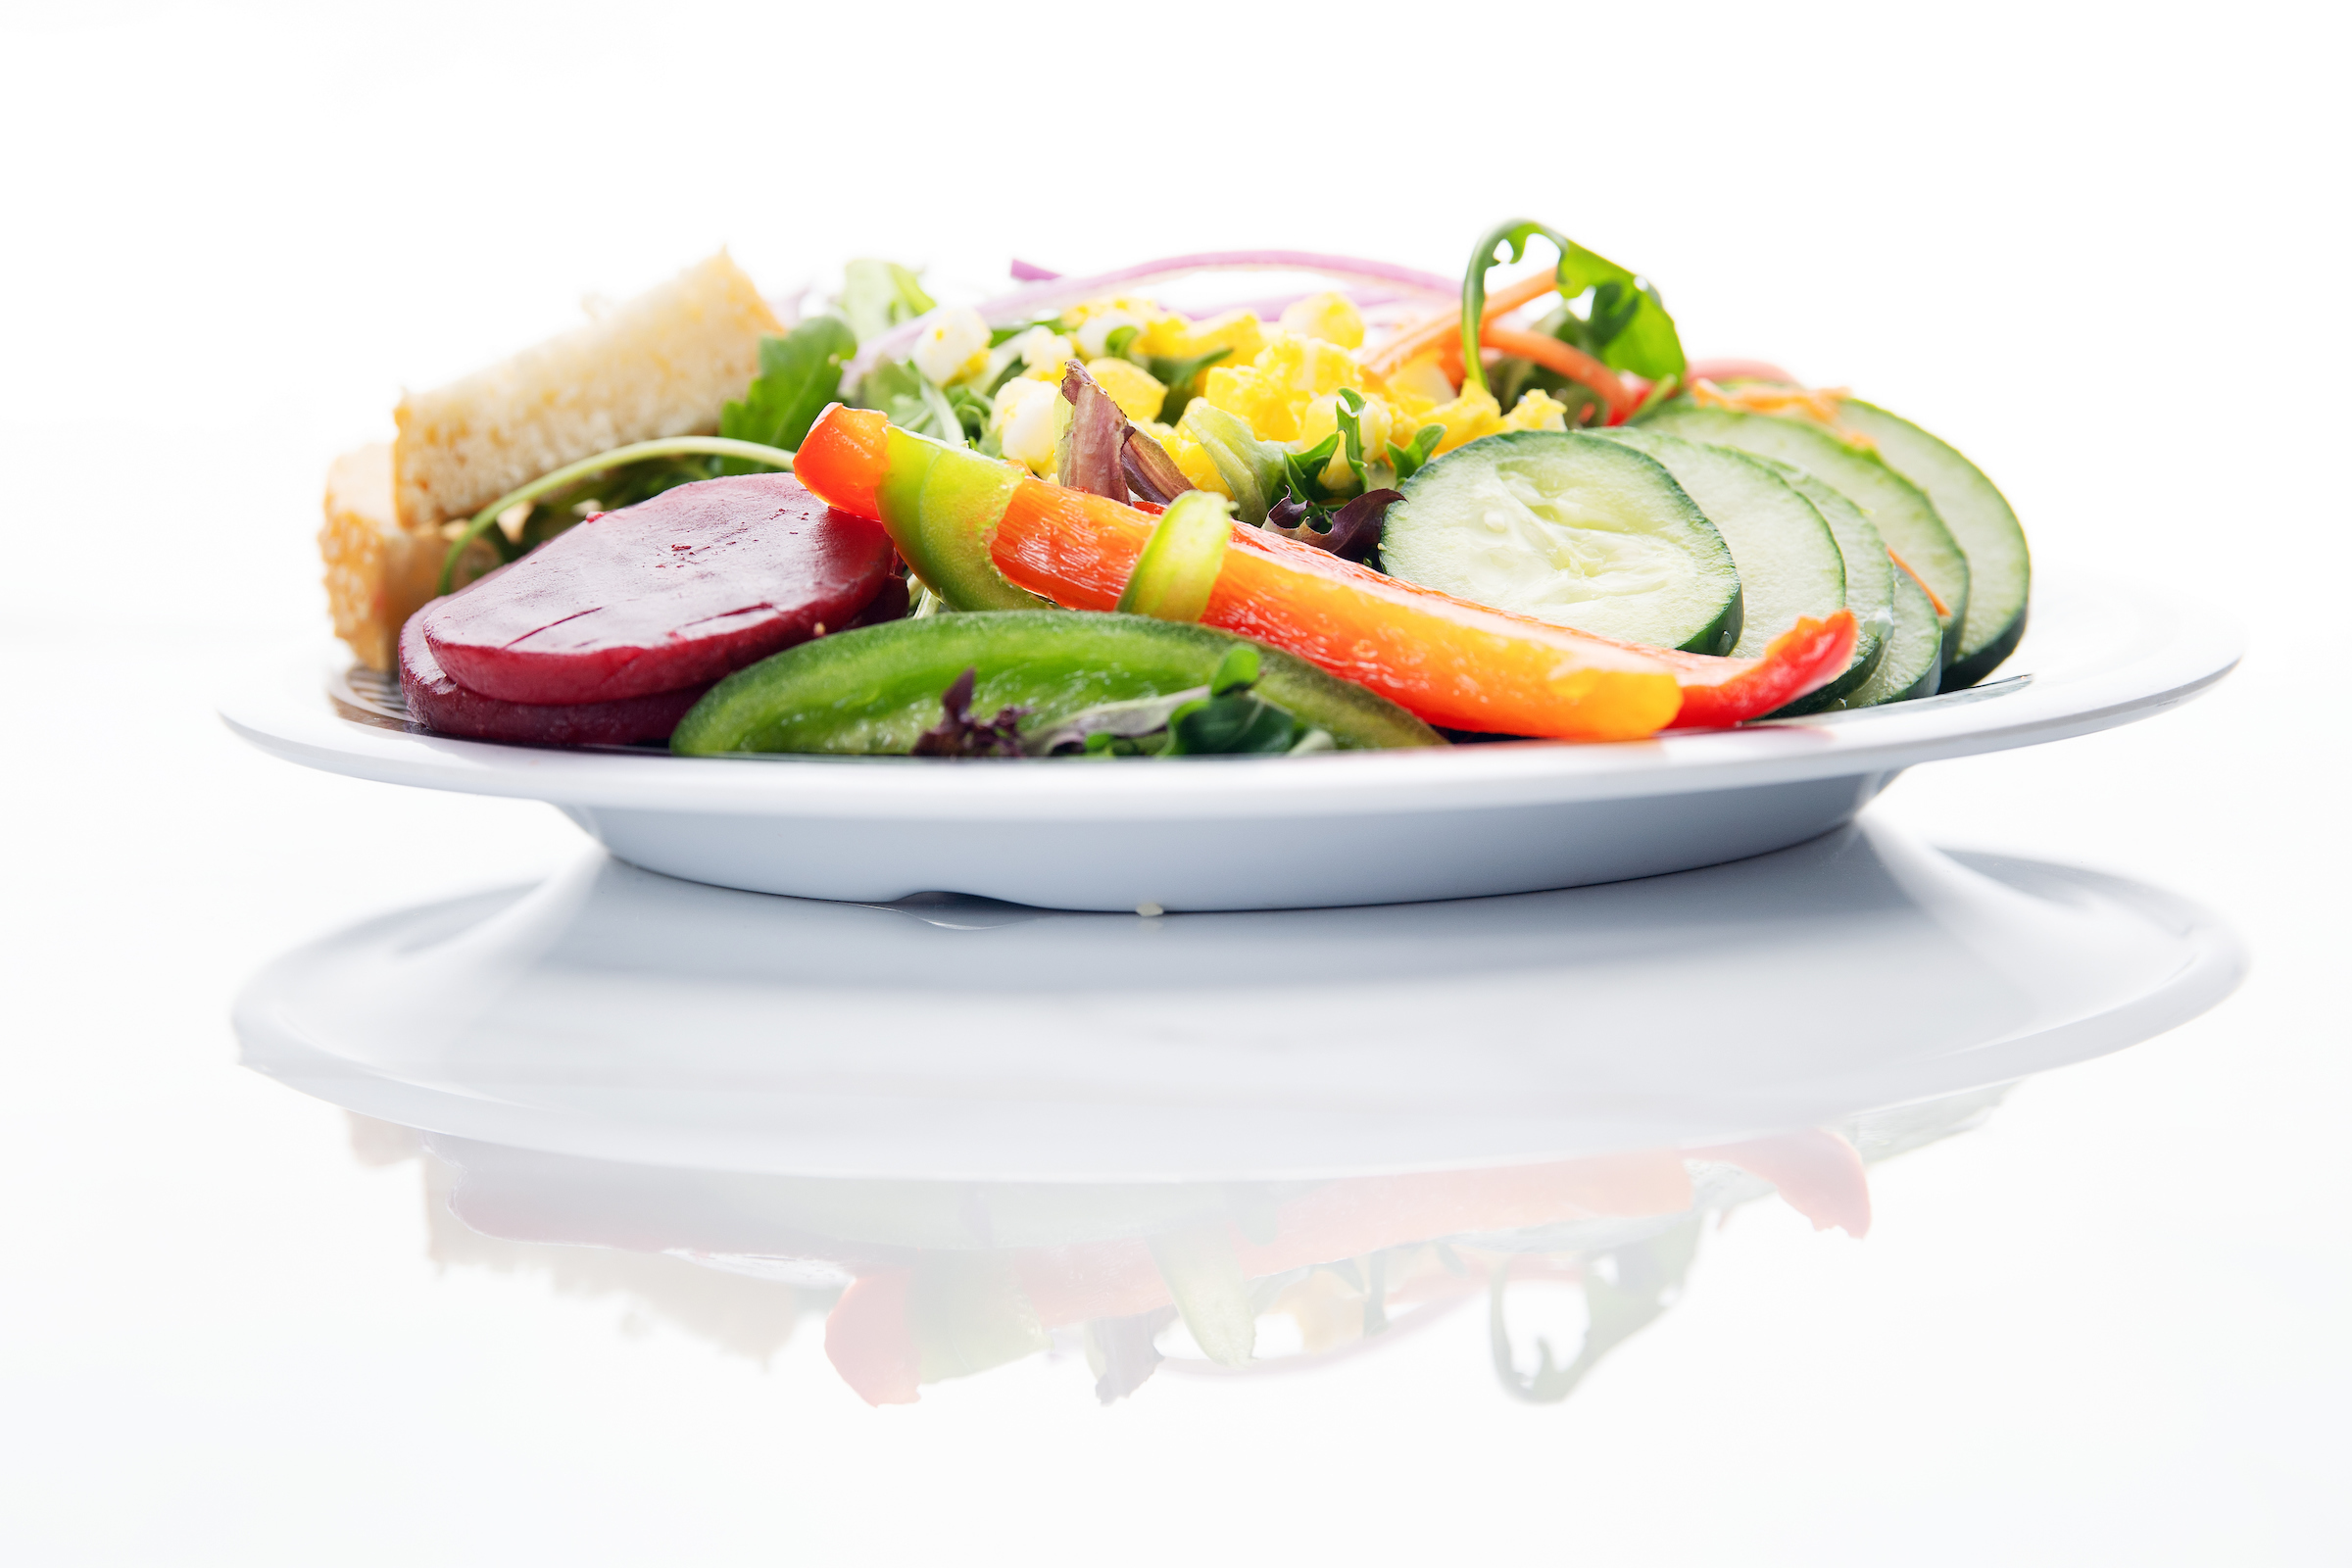 A plate of vegetable salad on a white background